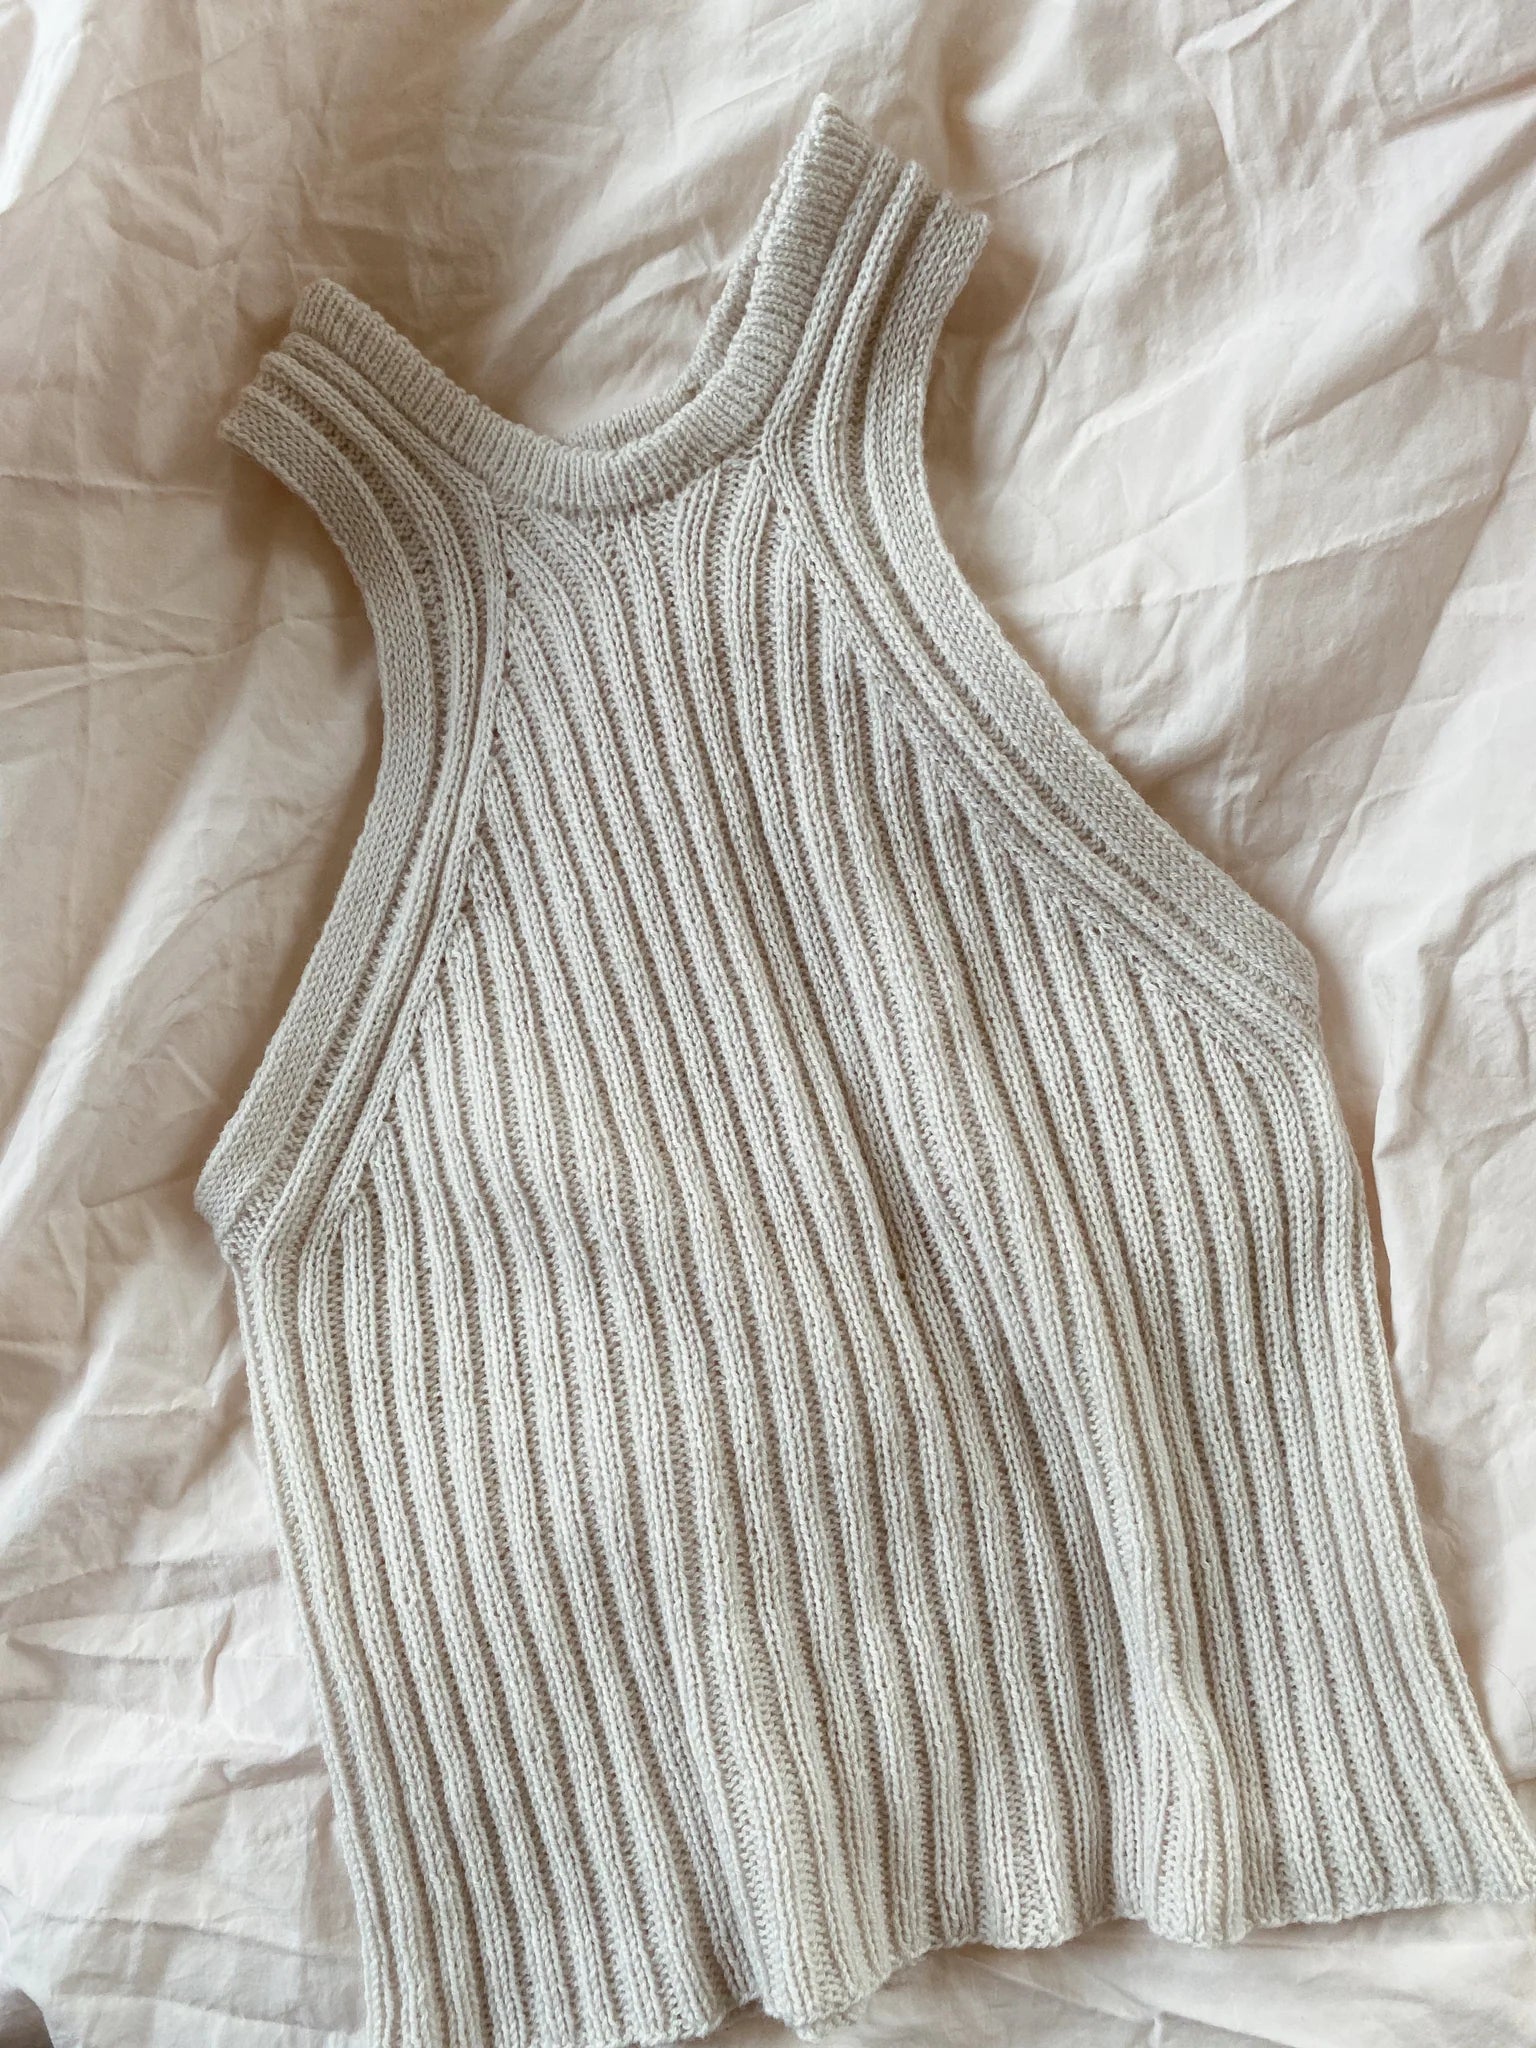 Camisole No. 5 My Favourite Things Knitwear - Strikkekit